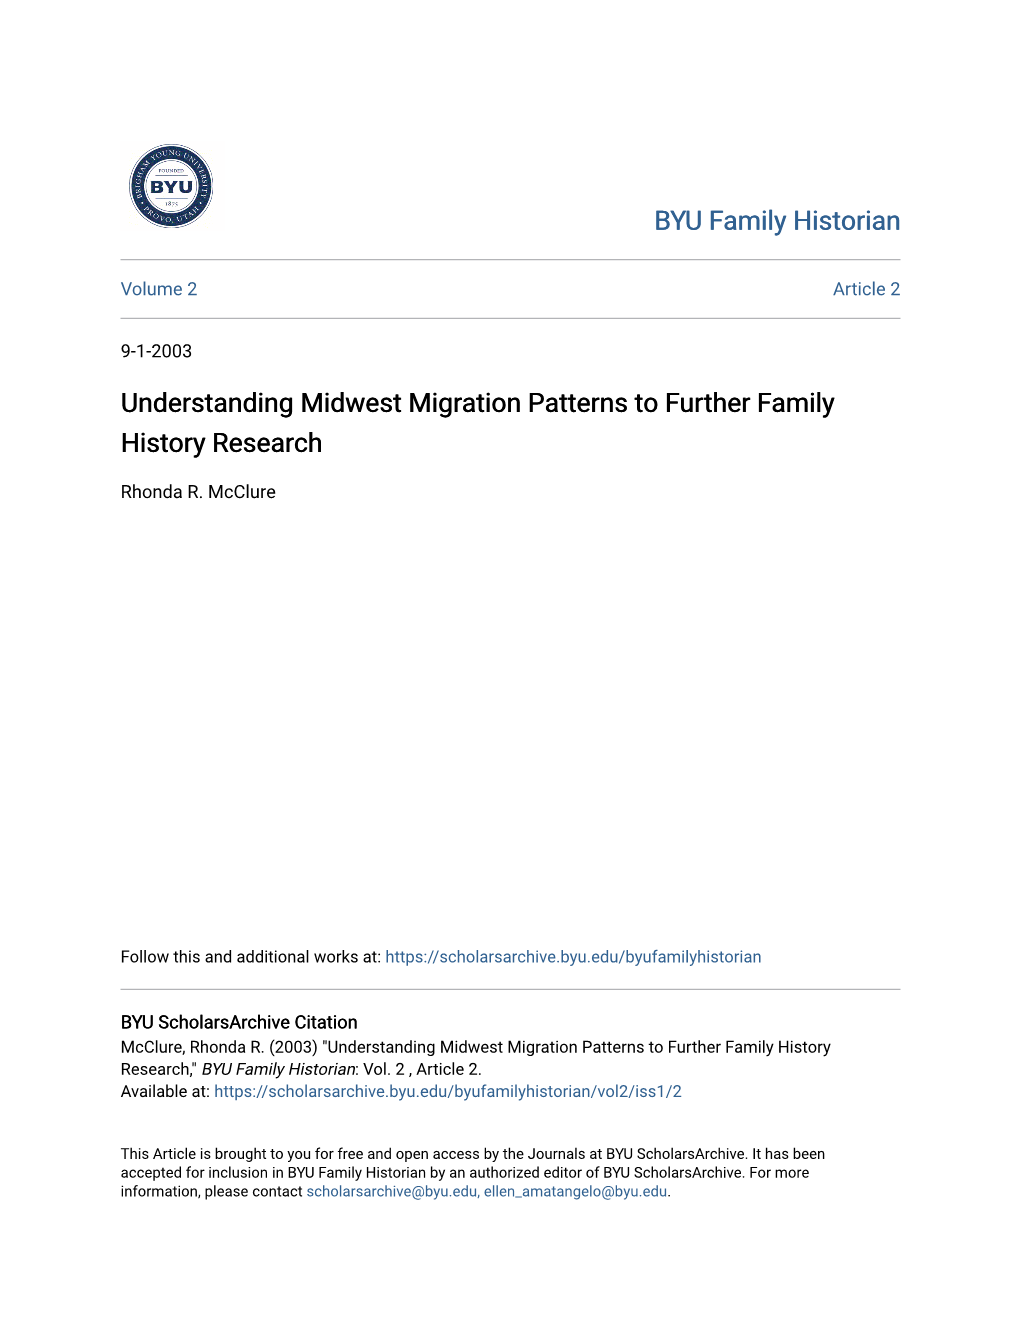 Understanding Midwest Migration Patterns to Further Family History Research